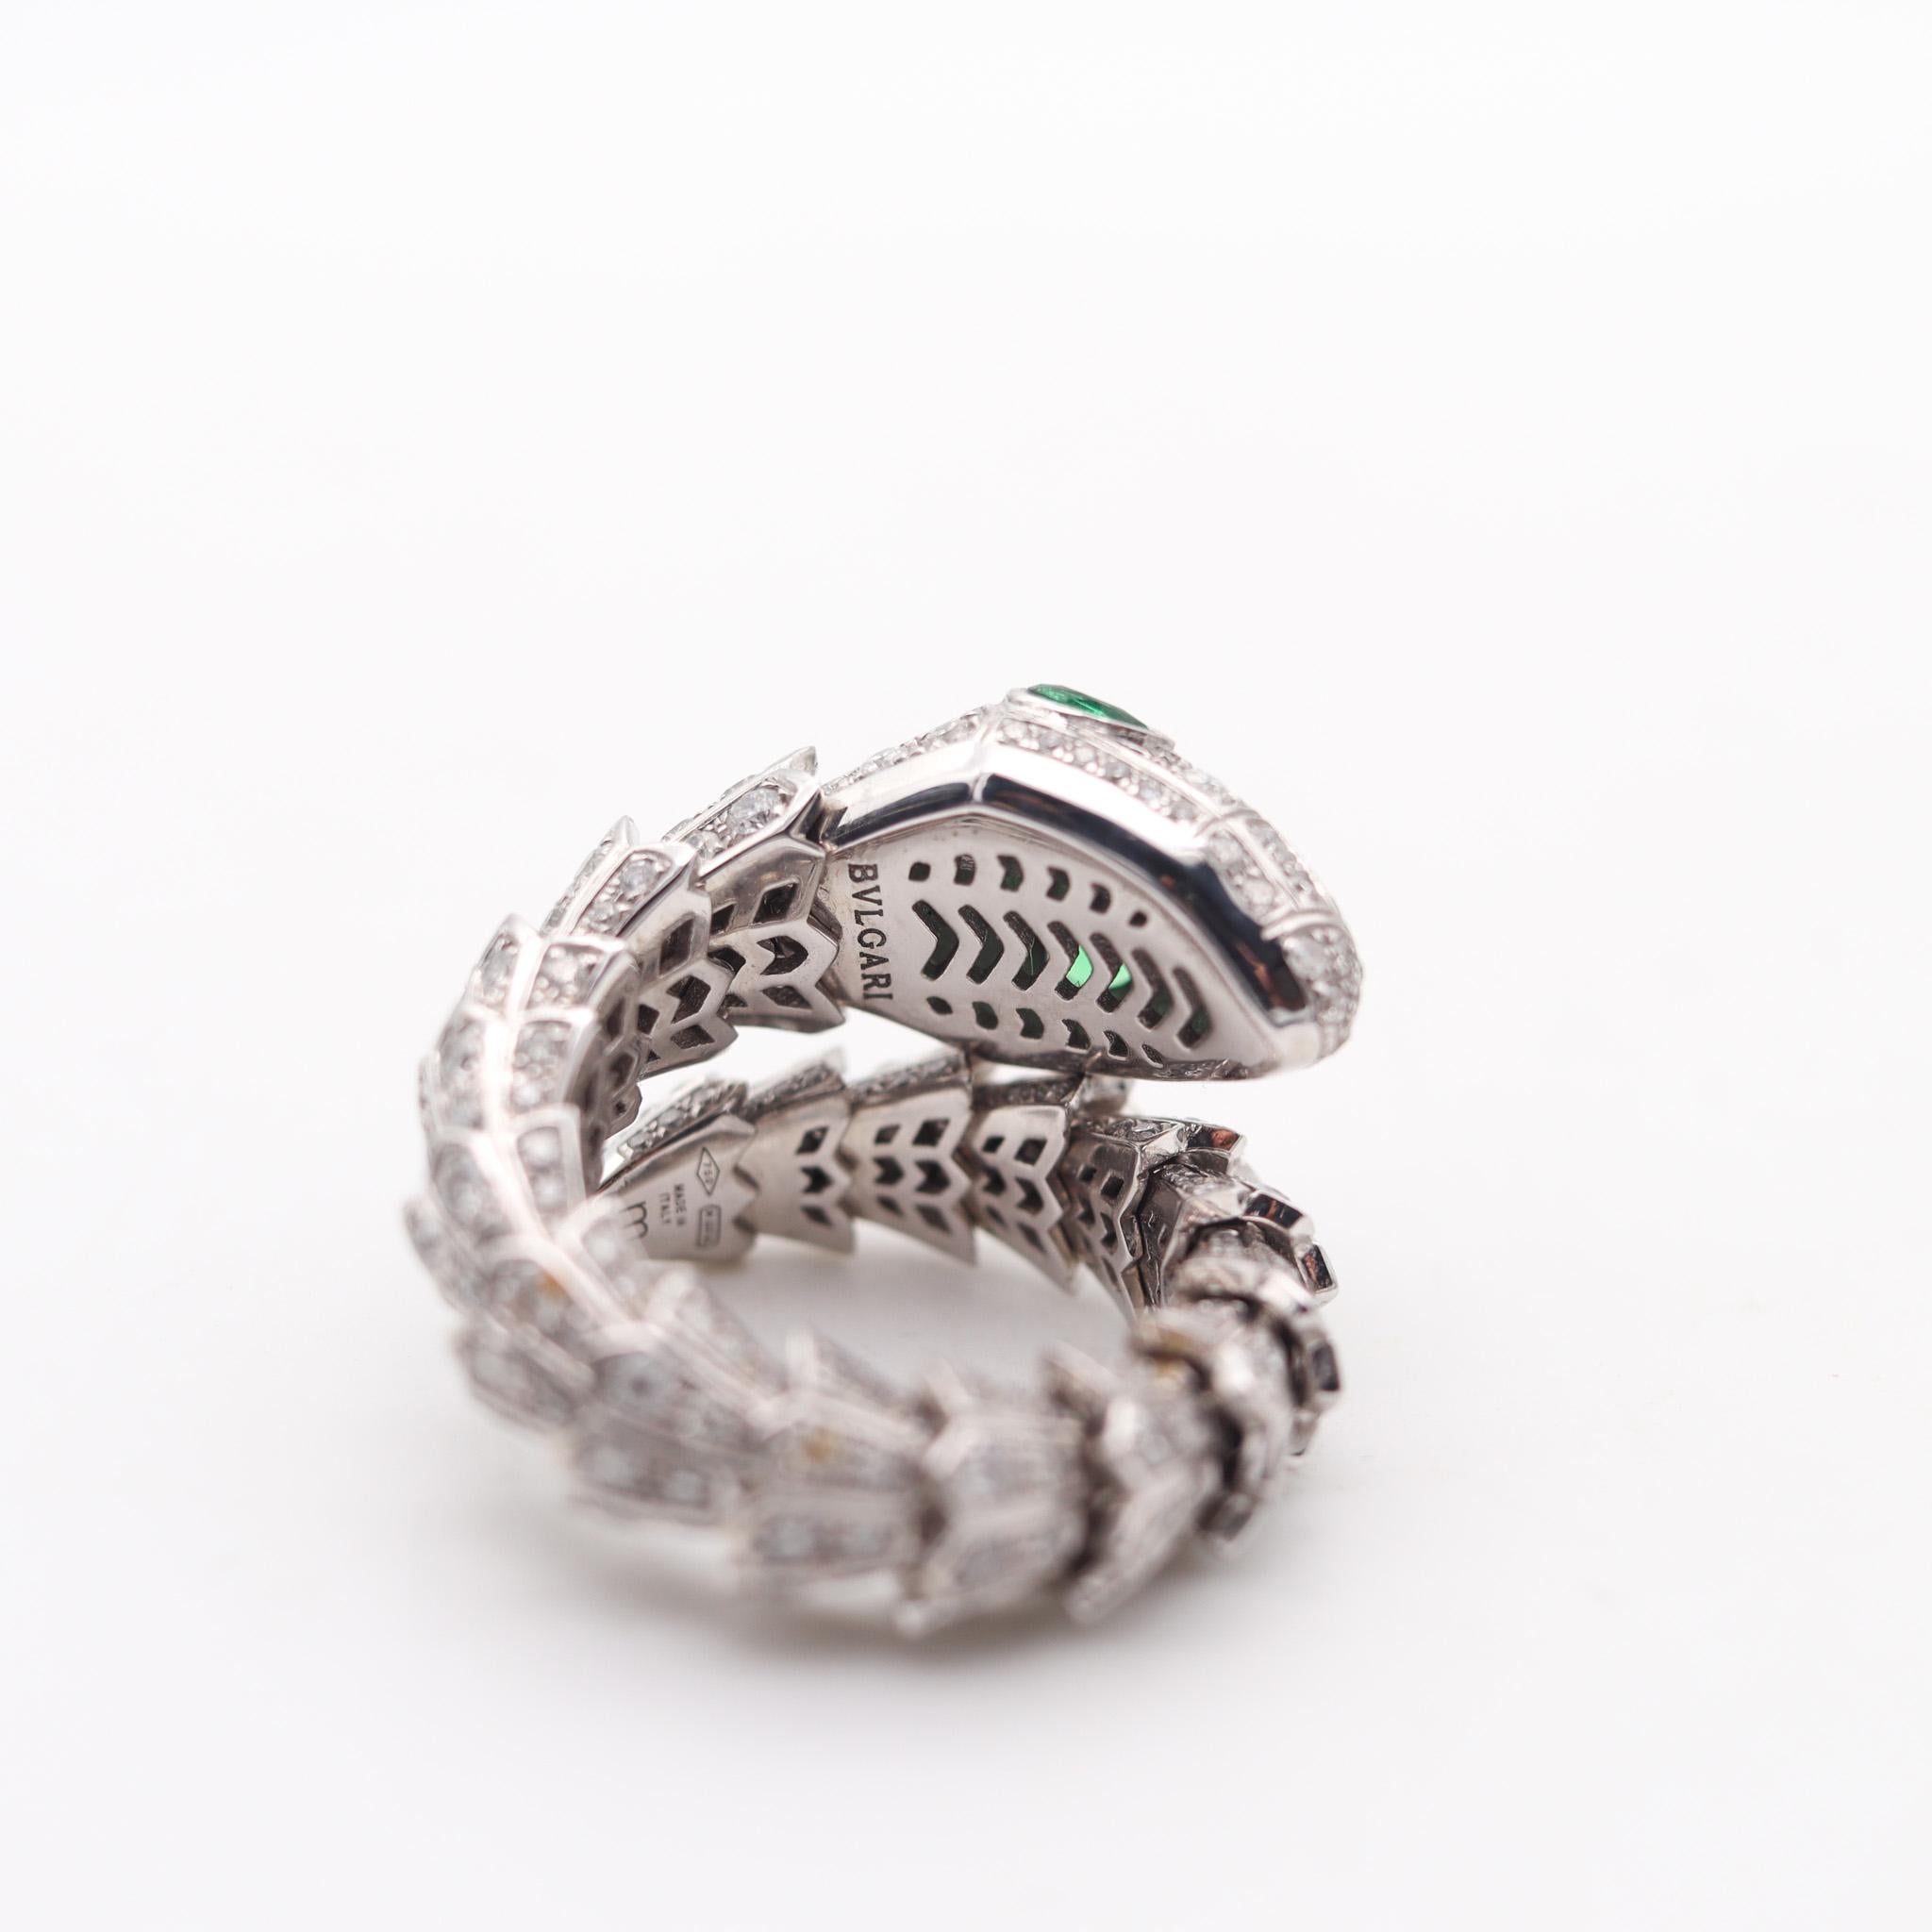 Modernist Bvlgari Roma Serpenti Ring In 18Kt Gold With 7.36 Ctw In Diamonds And Emerald For Sale